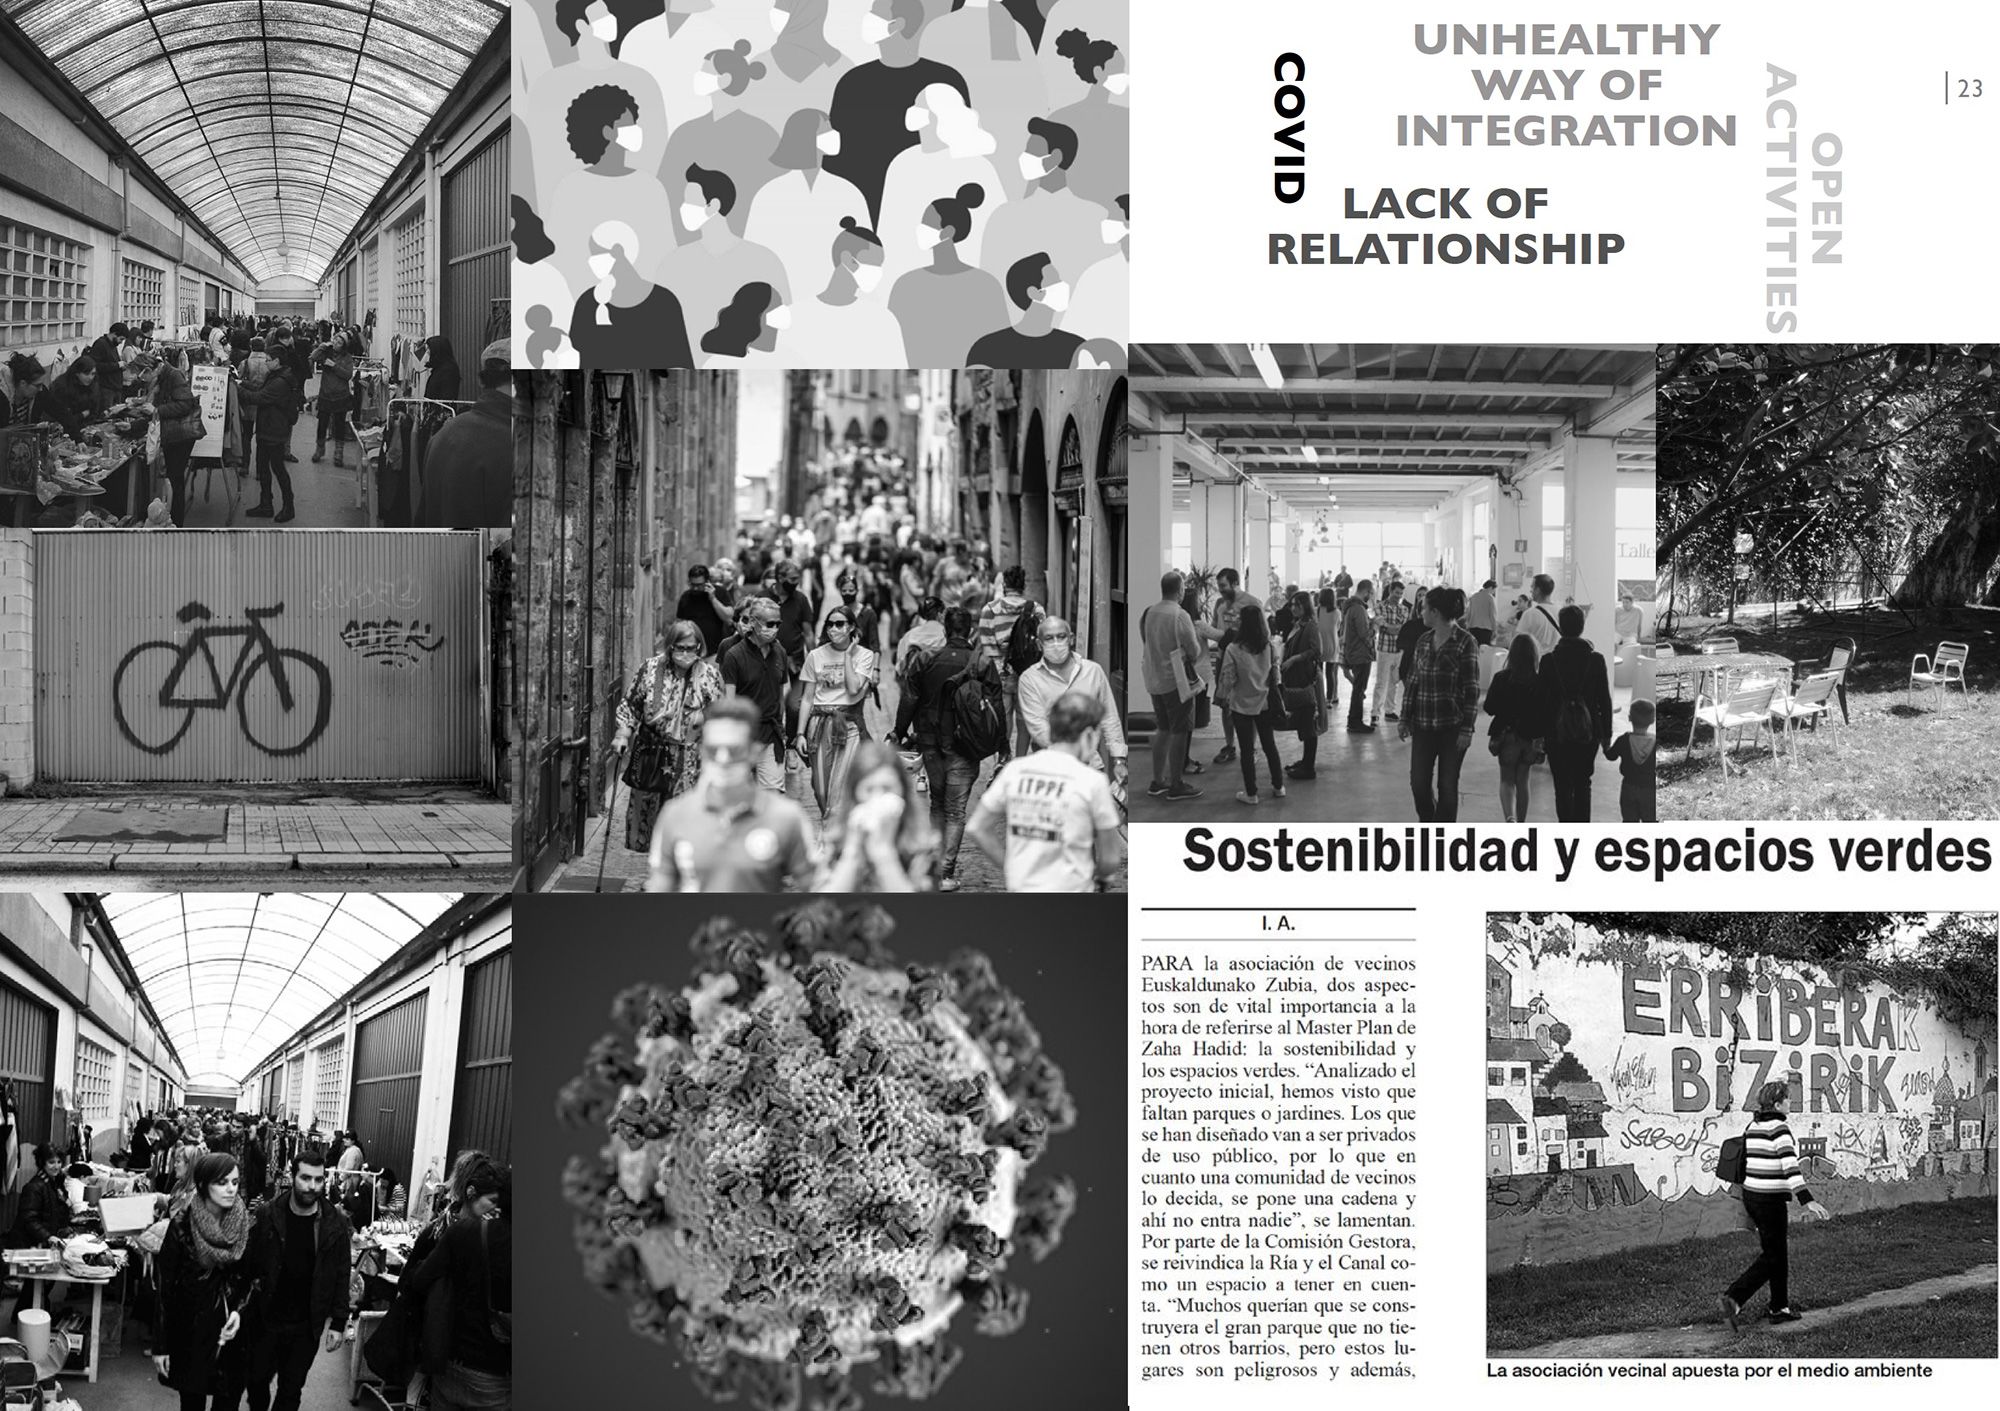 Image is of a black and white collage with newspaper snipping's written in Spanish, the headline translated is ‘Sustainability in green spaces’ Images in the collage are of people in large groups visiting places within the city, some people are wearing masks, there is also an image of the Covid-19 virus.